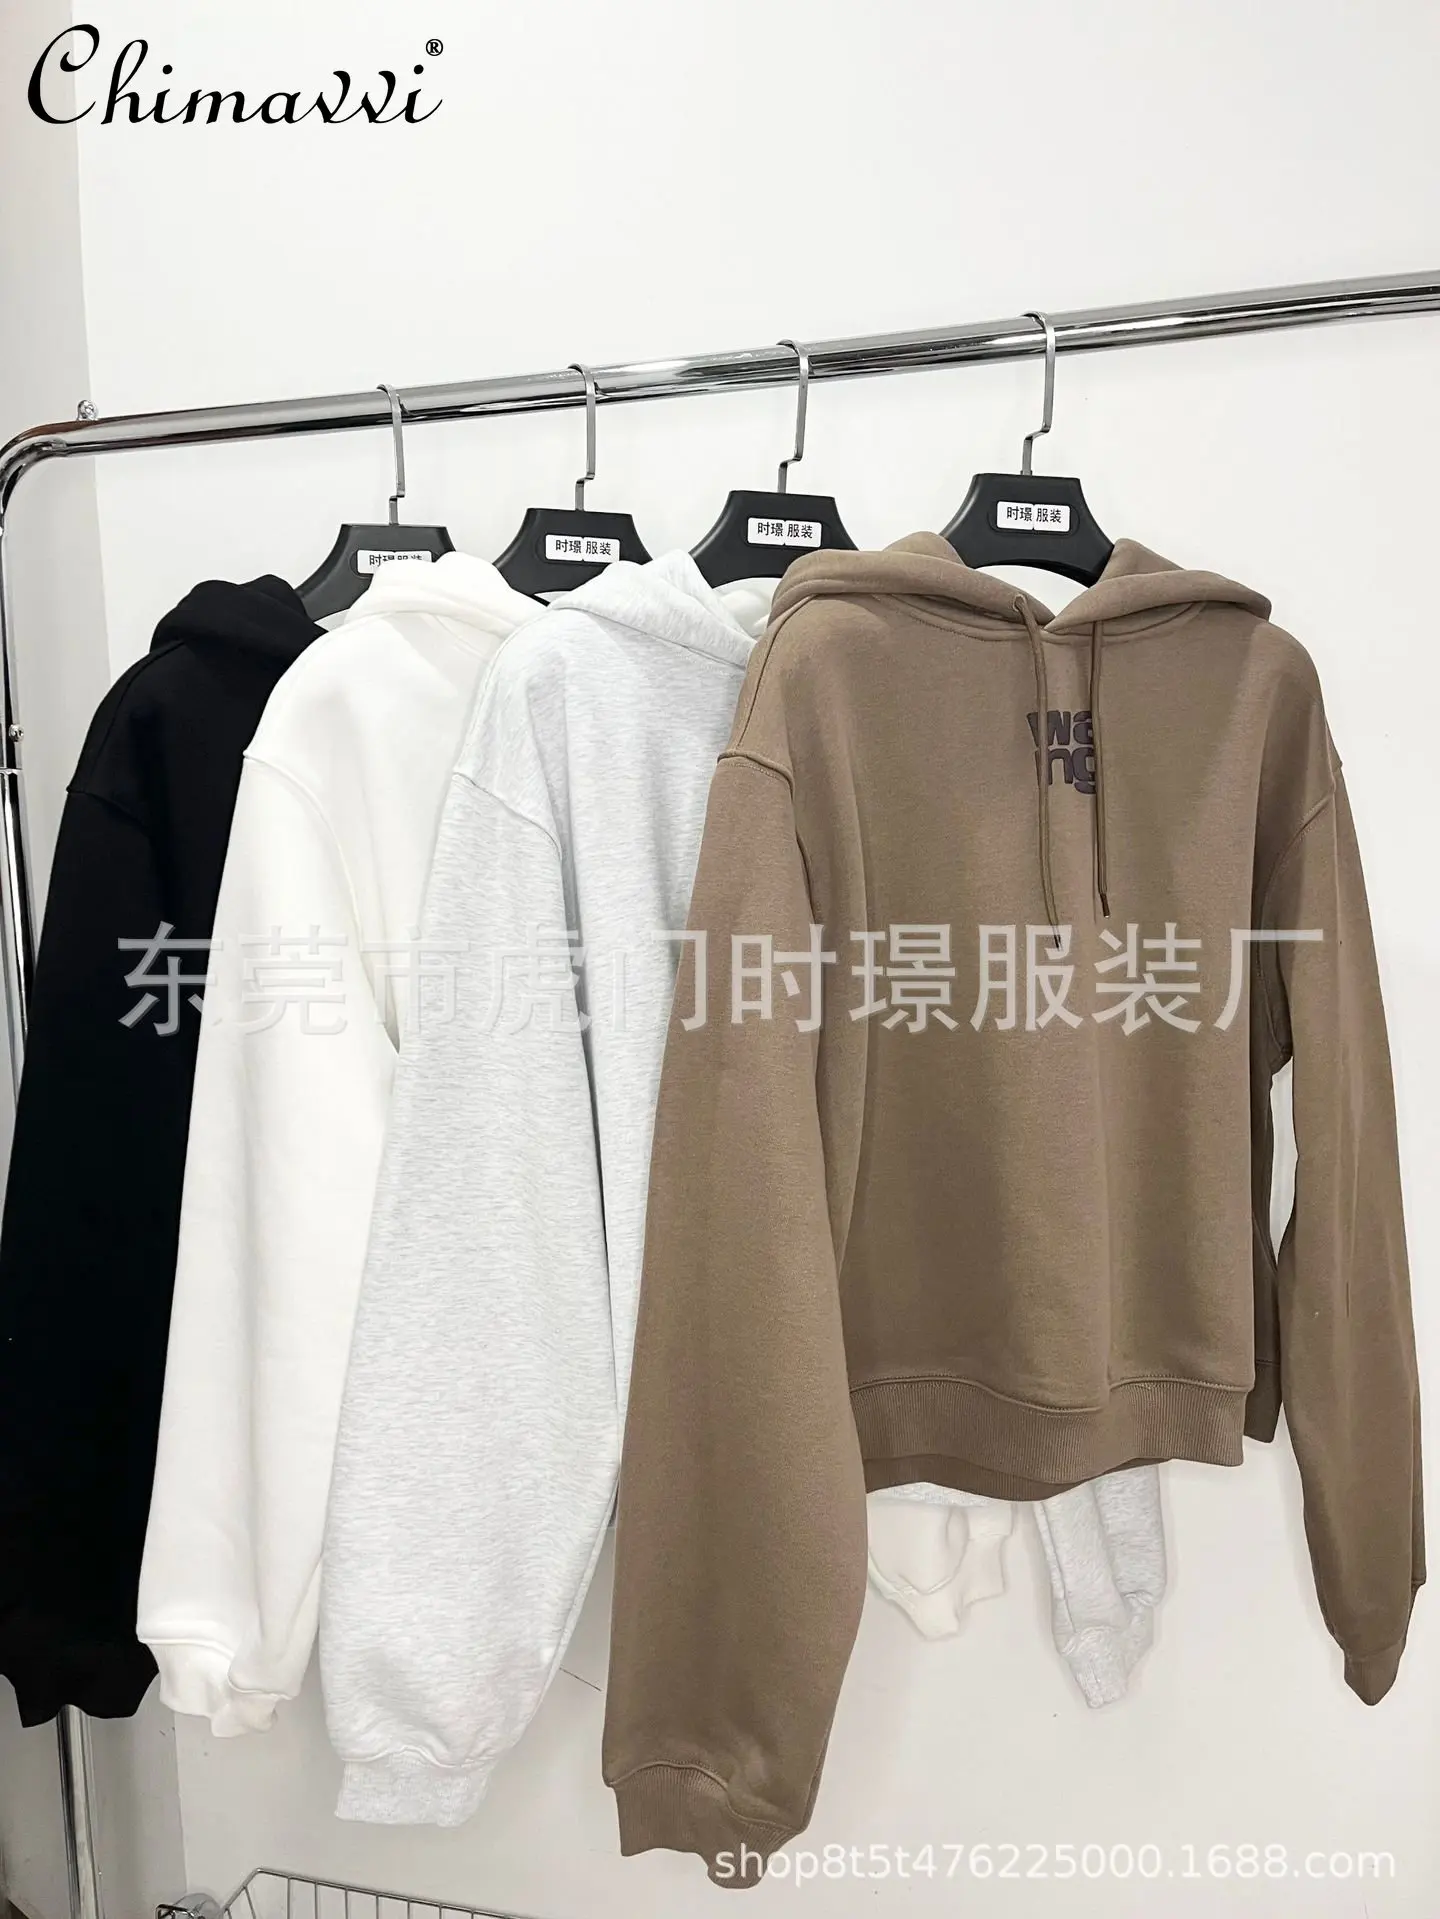 New Hoodie for Women Winter Fashion Letter Print Casual Long Sleeve Loose Pullover Sweatershirt Elegant Casual Tops All-Matching